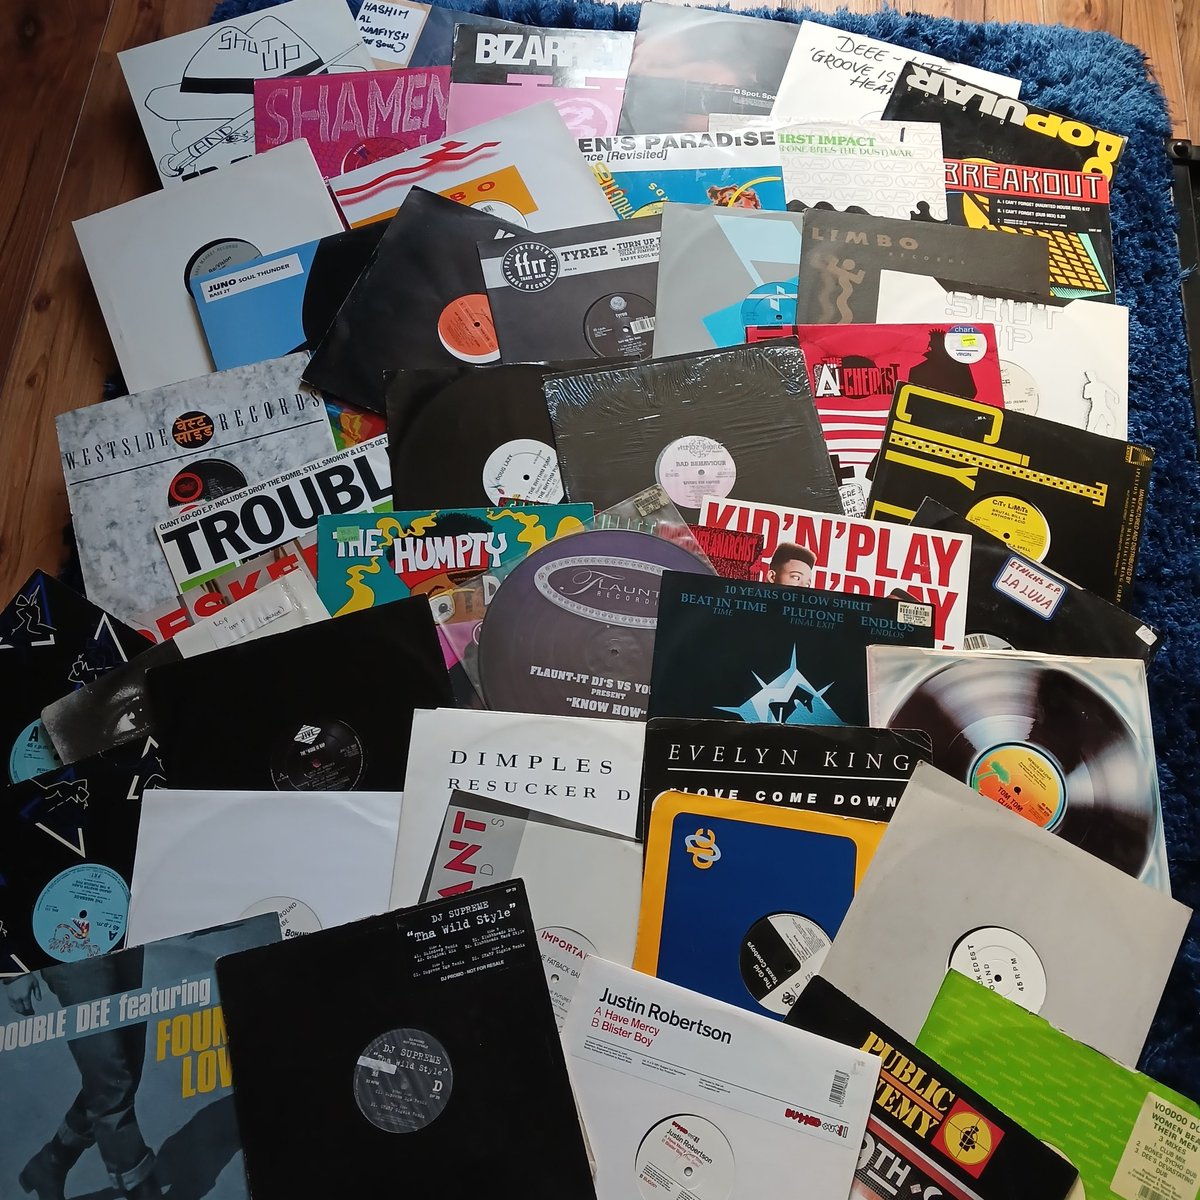 How much for all of em? 30 quid alright? Splendid. @filthythanks @AcidGrandads @DanKelly72 @square_wave_ @idiotrufus